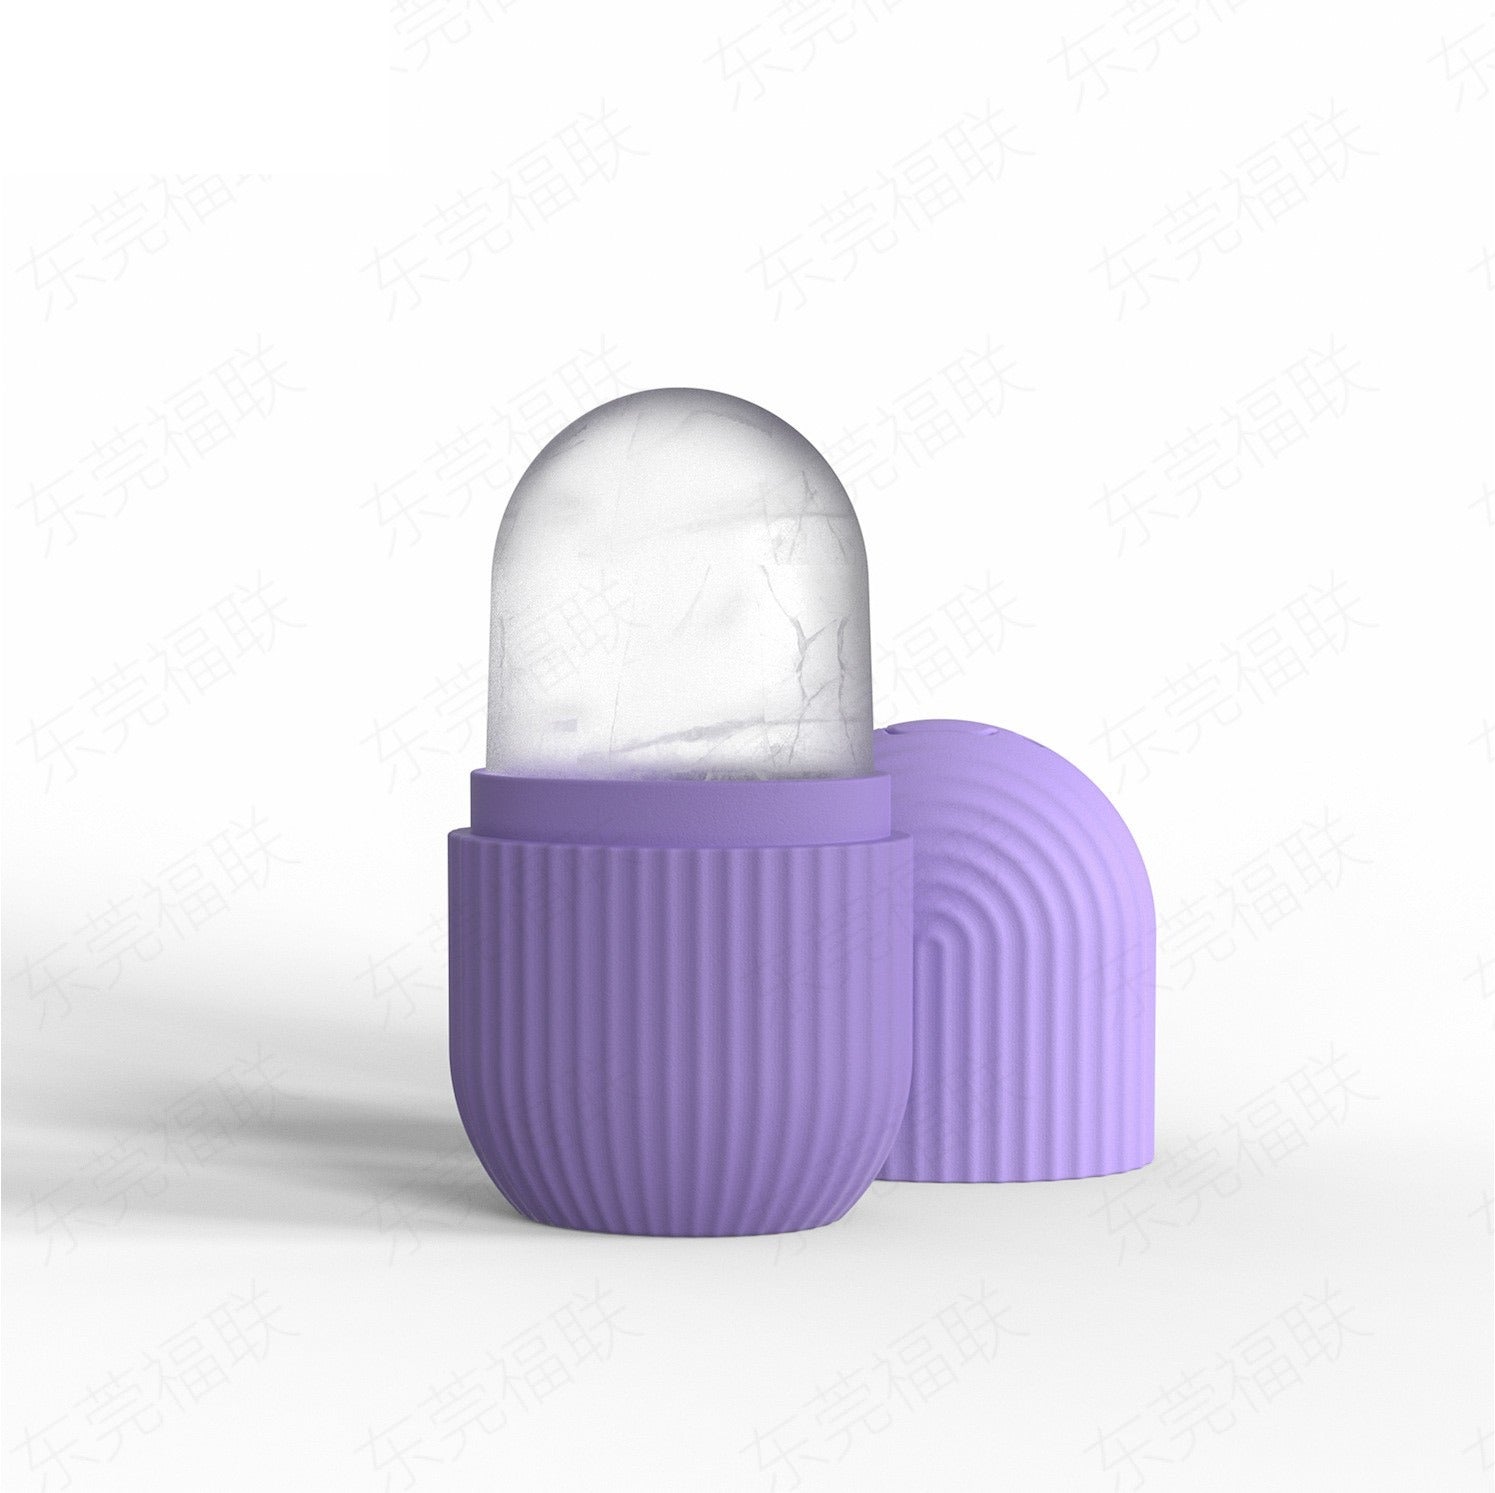 Silicone Ice Roller Massager in purple  color